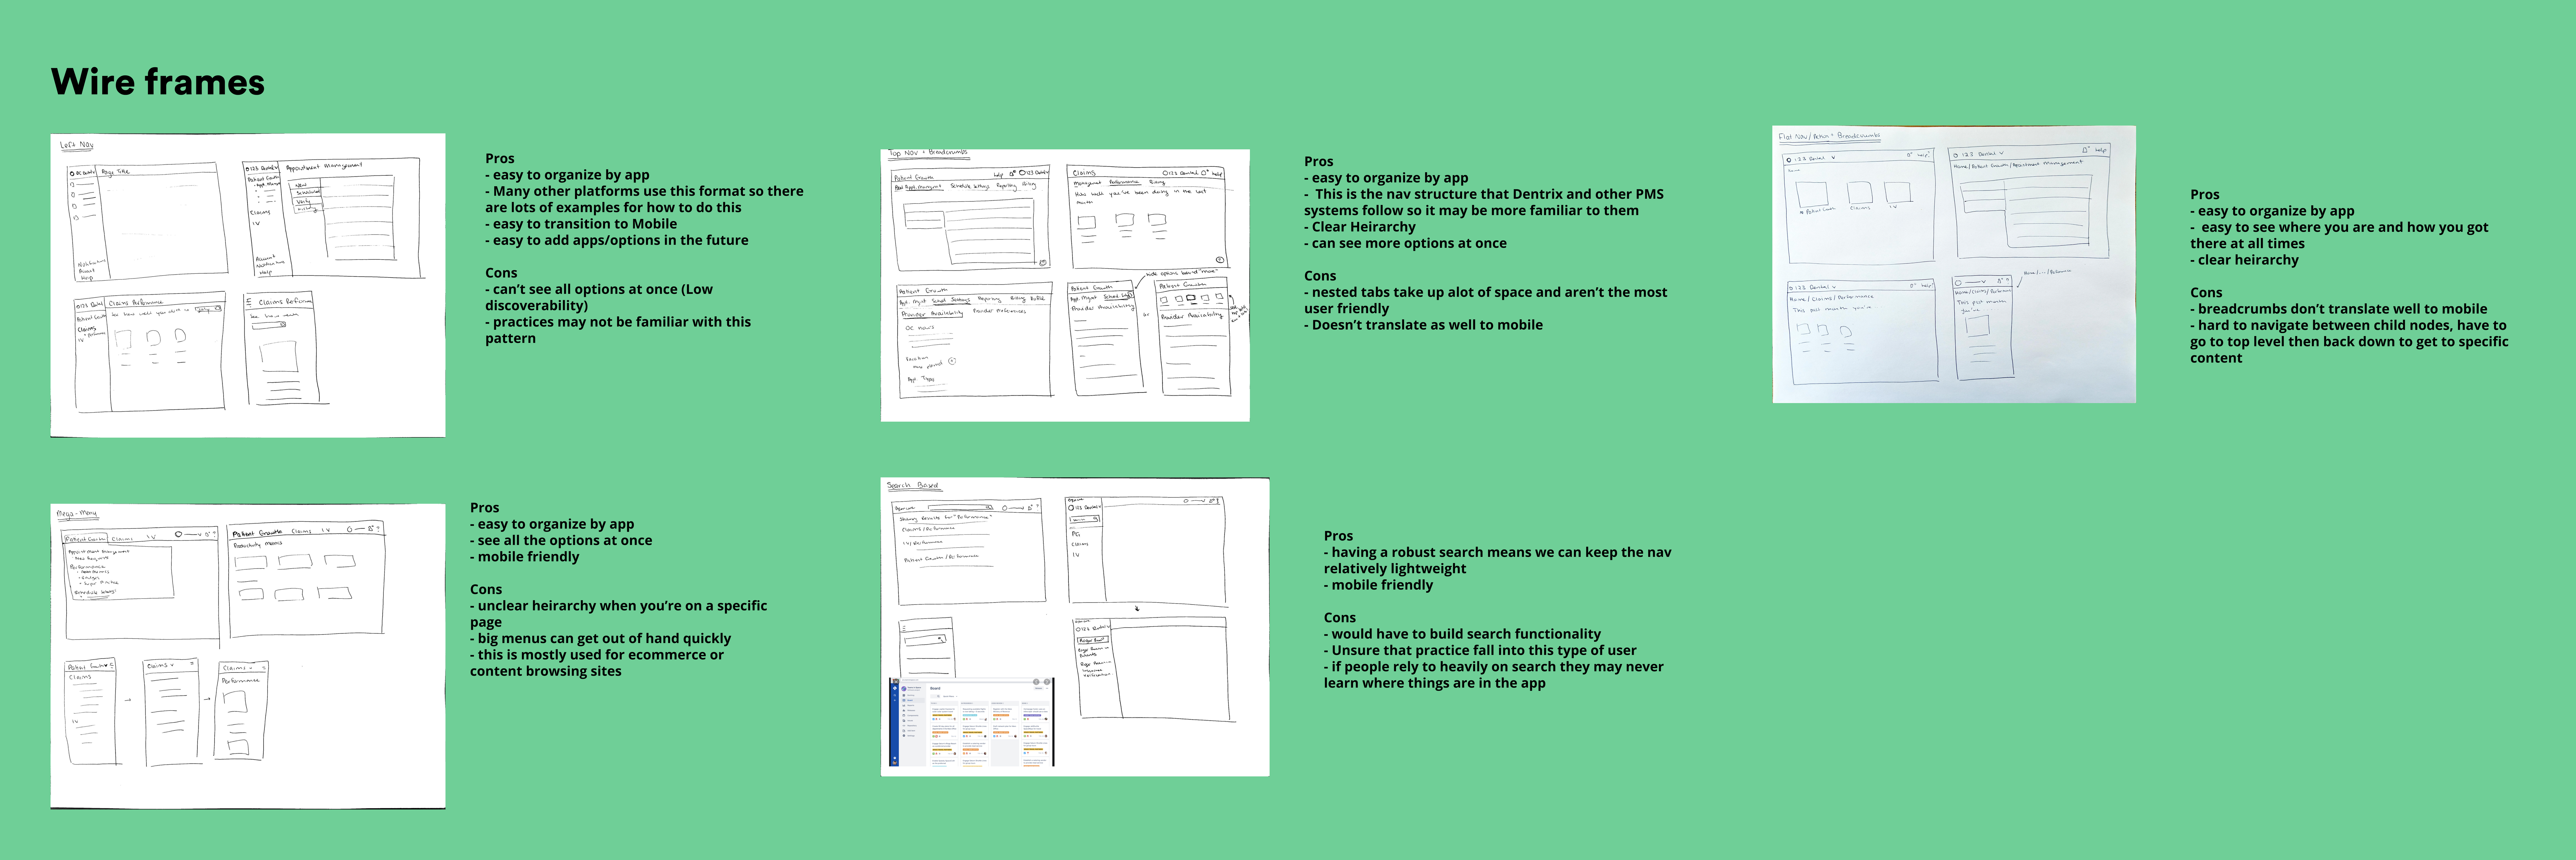 Some of the wireframing iterations